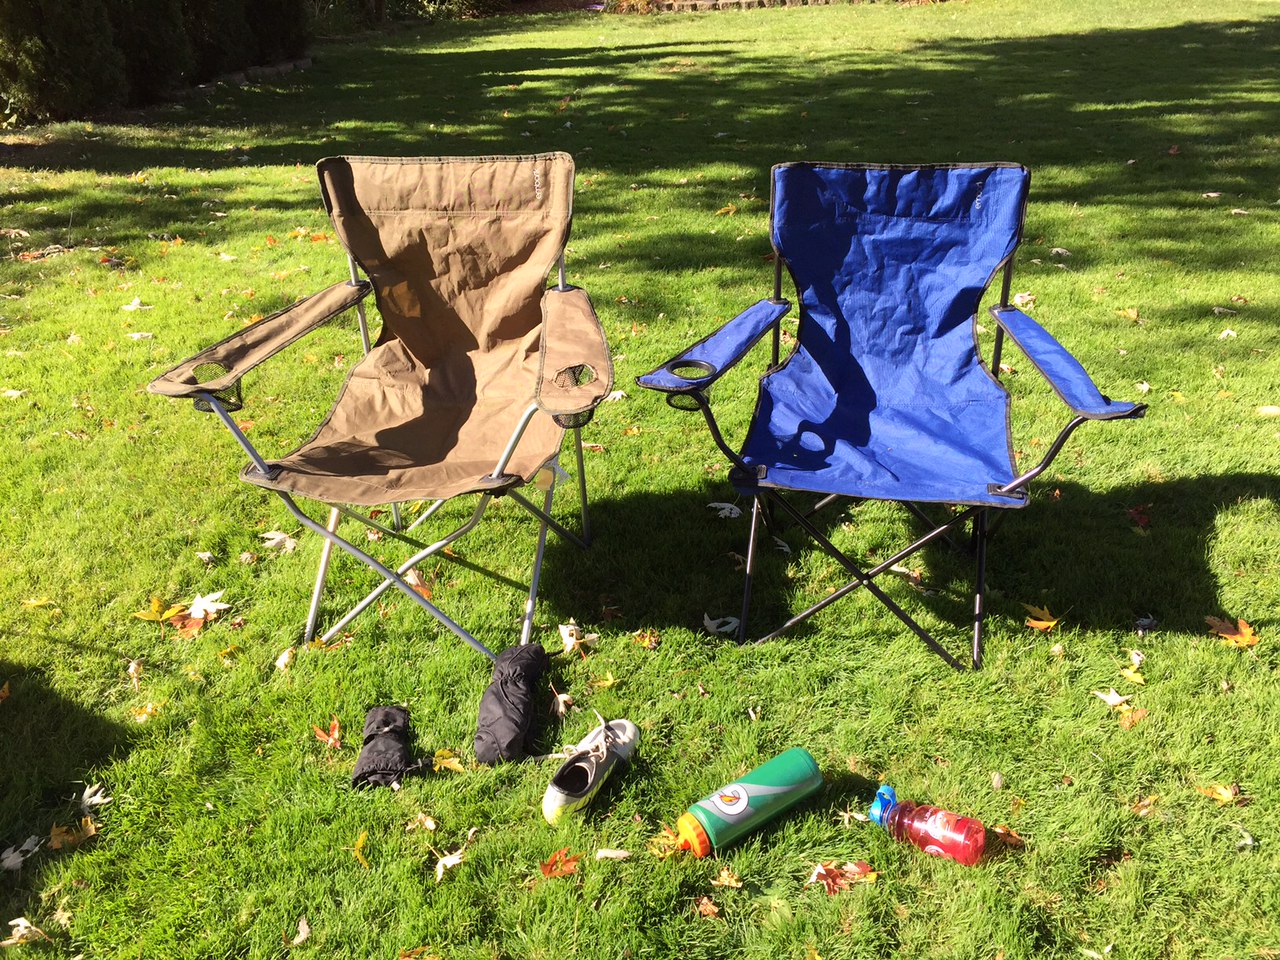 2015 camp out lost & found